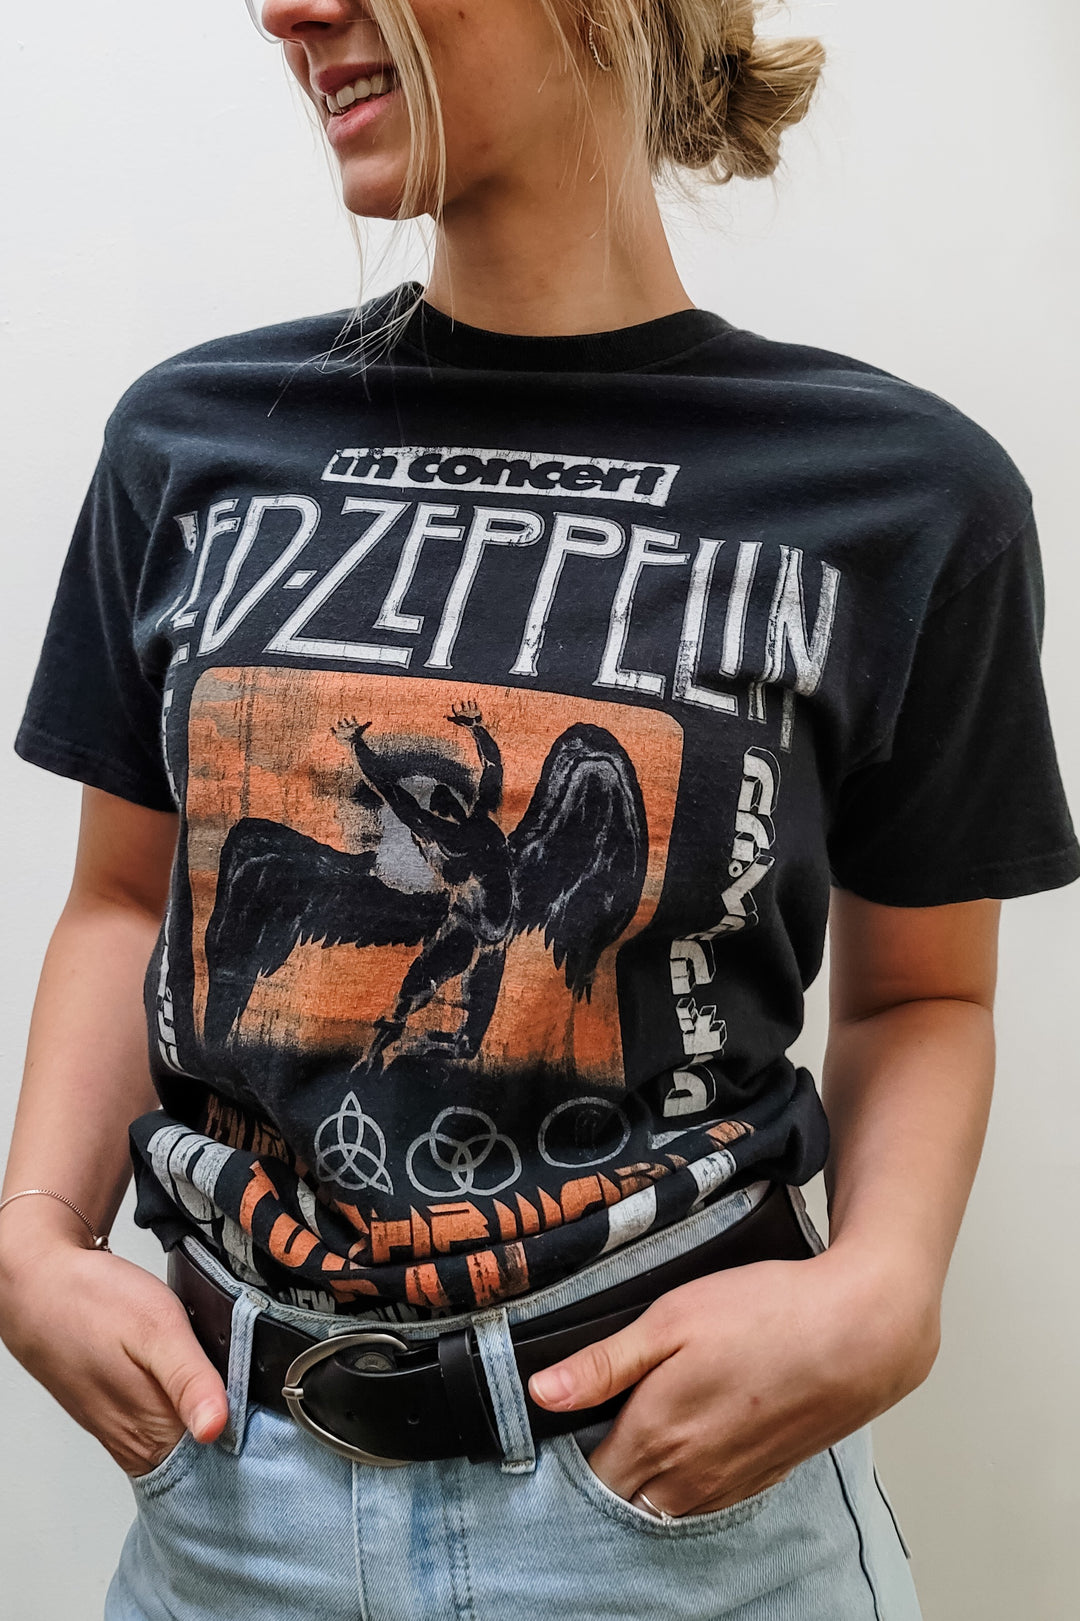 Led Zepplin In Concert Tour Of The World Black Graphic Tee